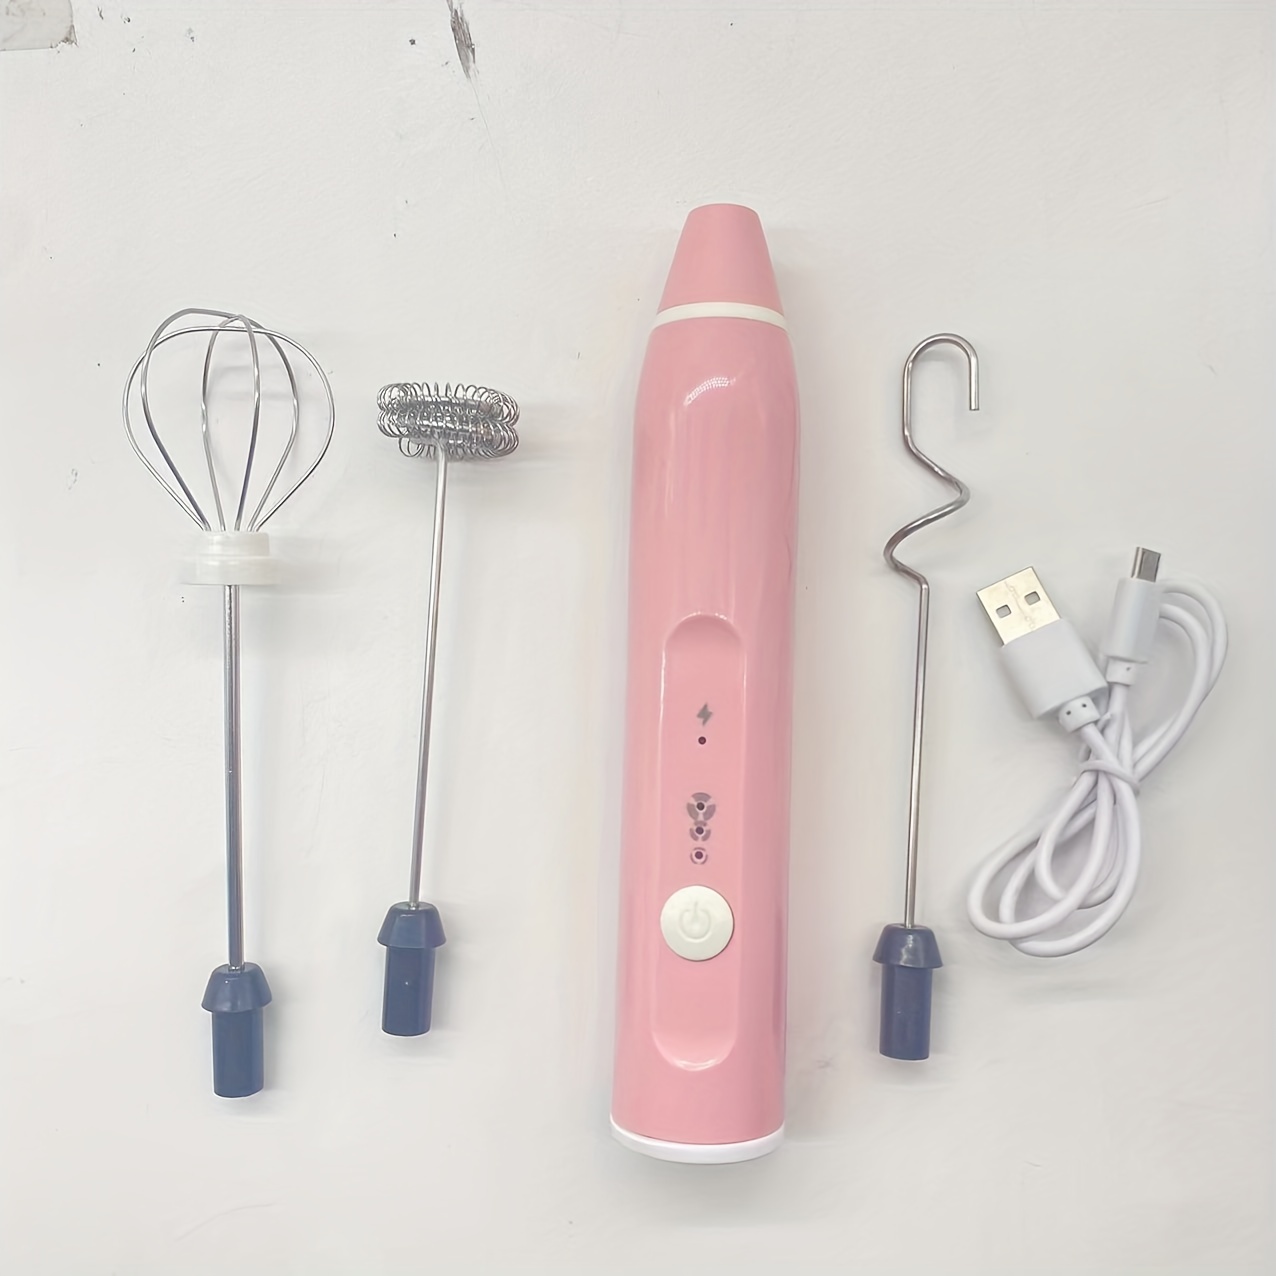 Wireless Electric Milk Frother Whisk Egg Beater USB Rechargeable